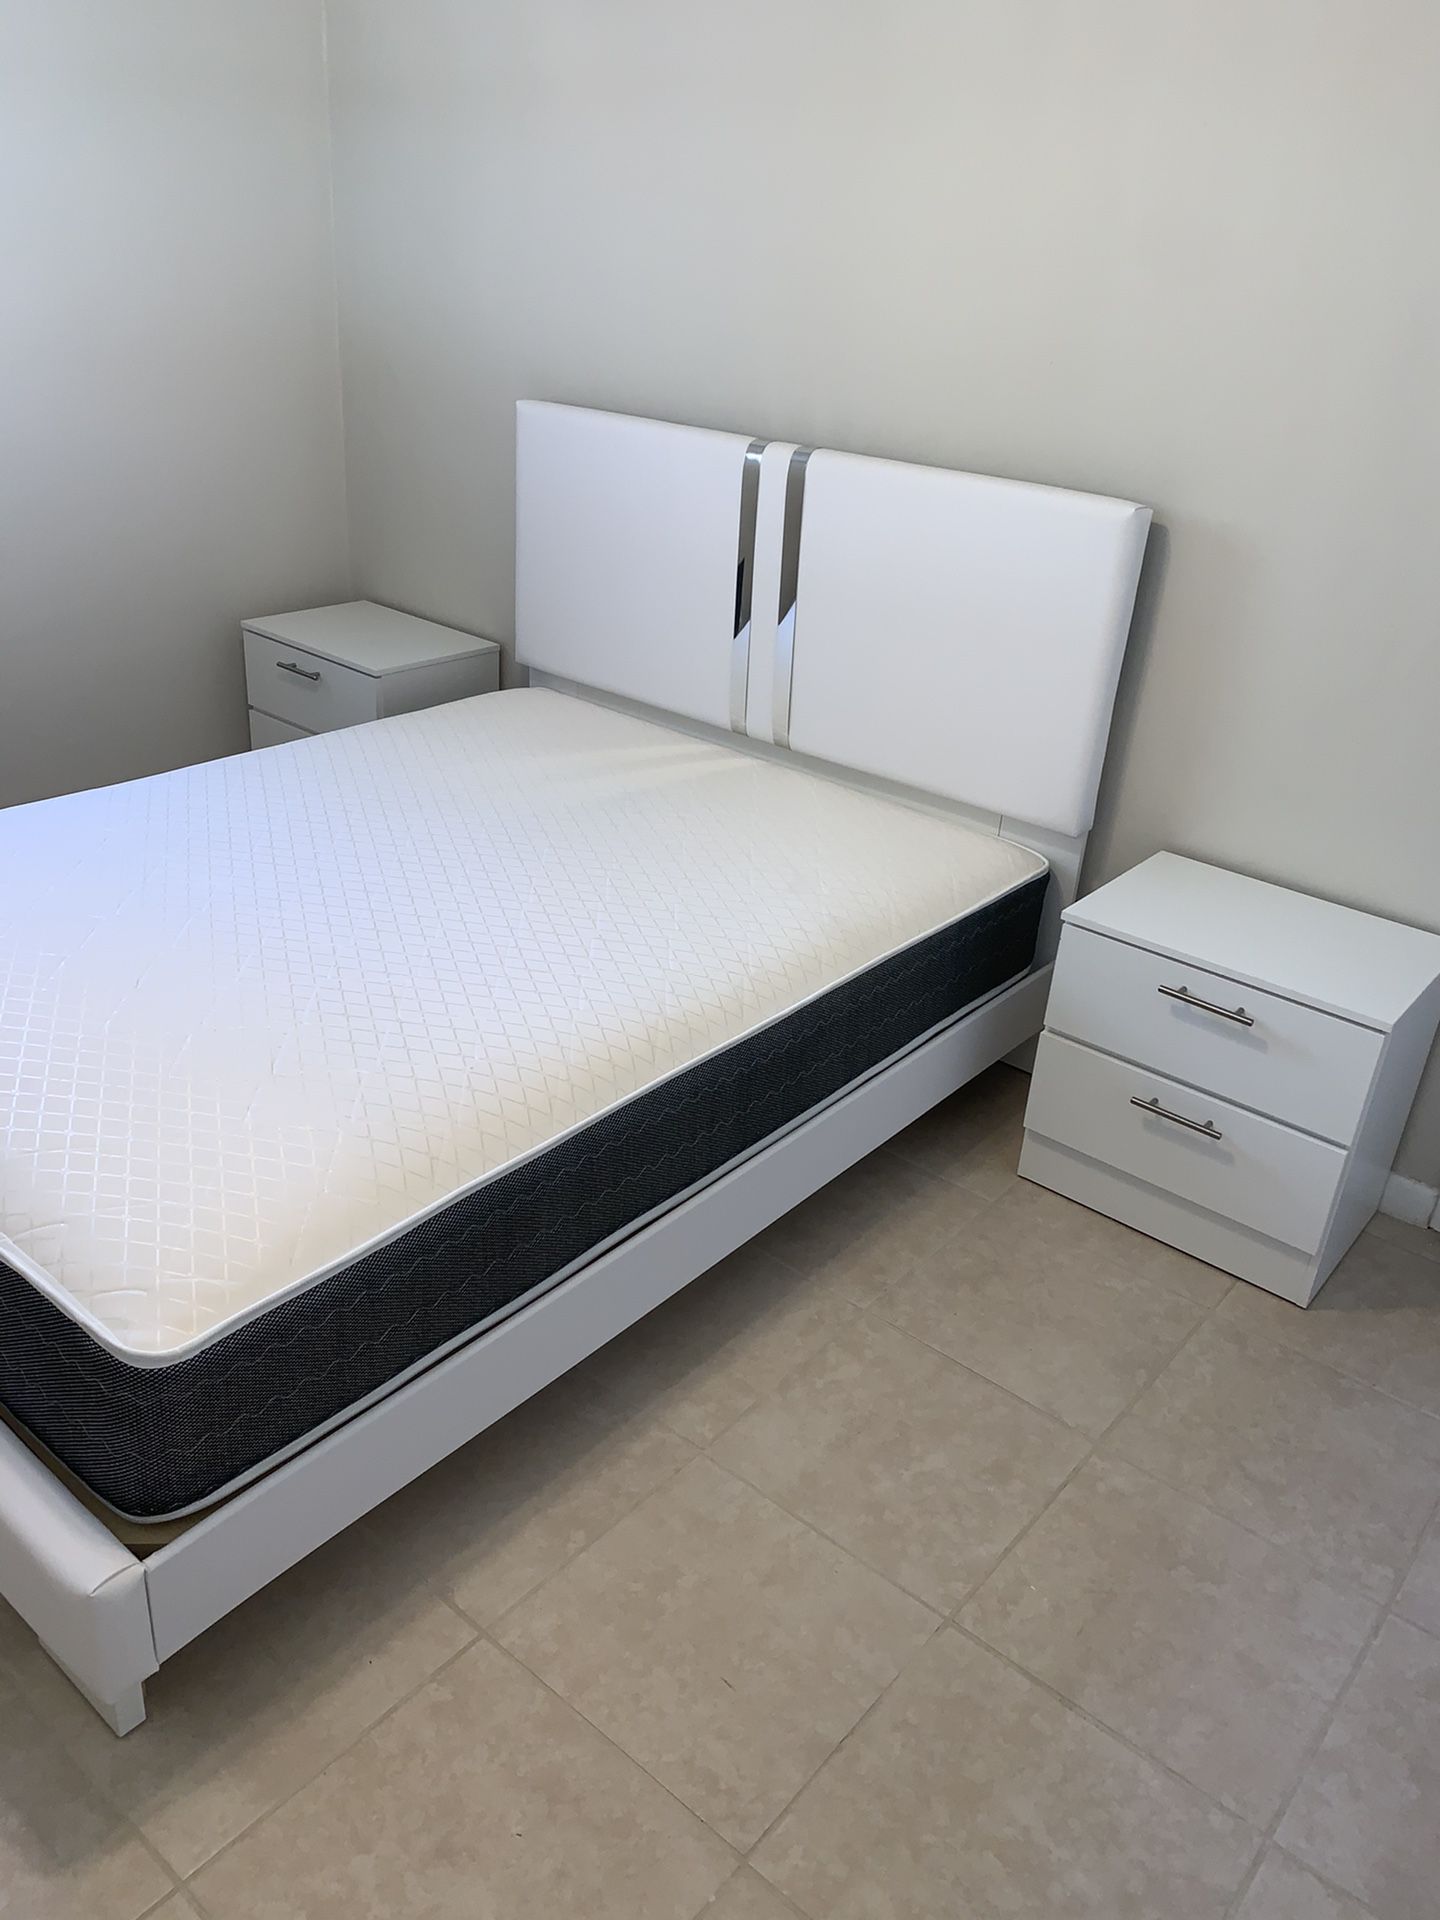 New queen white and silver 4 pieces bedroom set FREE DELIVERY and installation. Bed frame, mattress 2 night stands